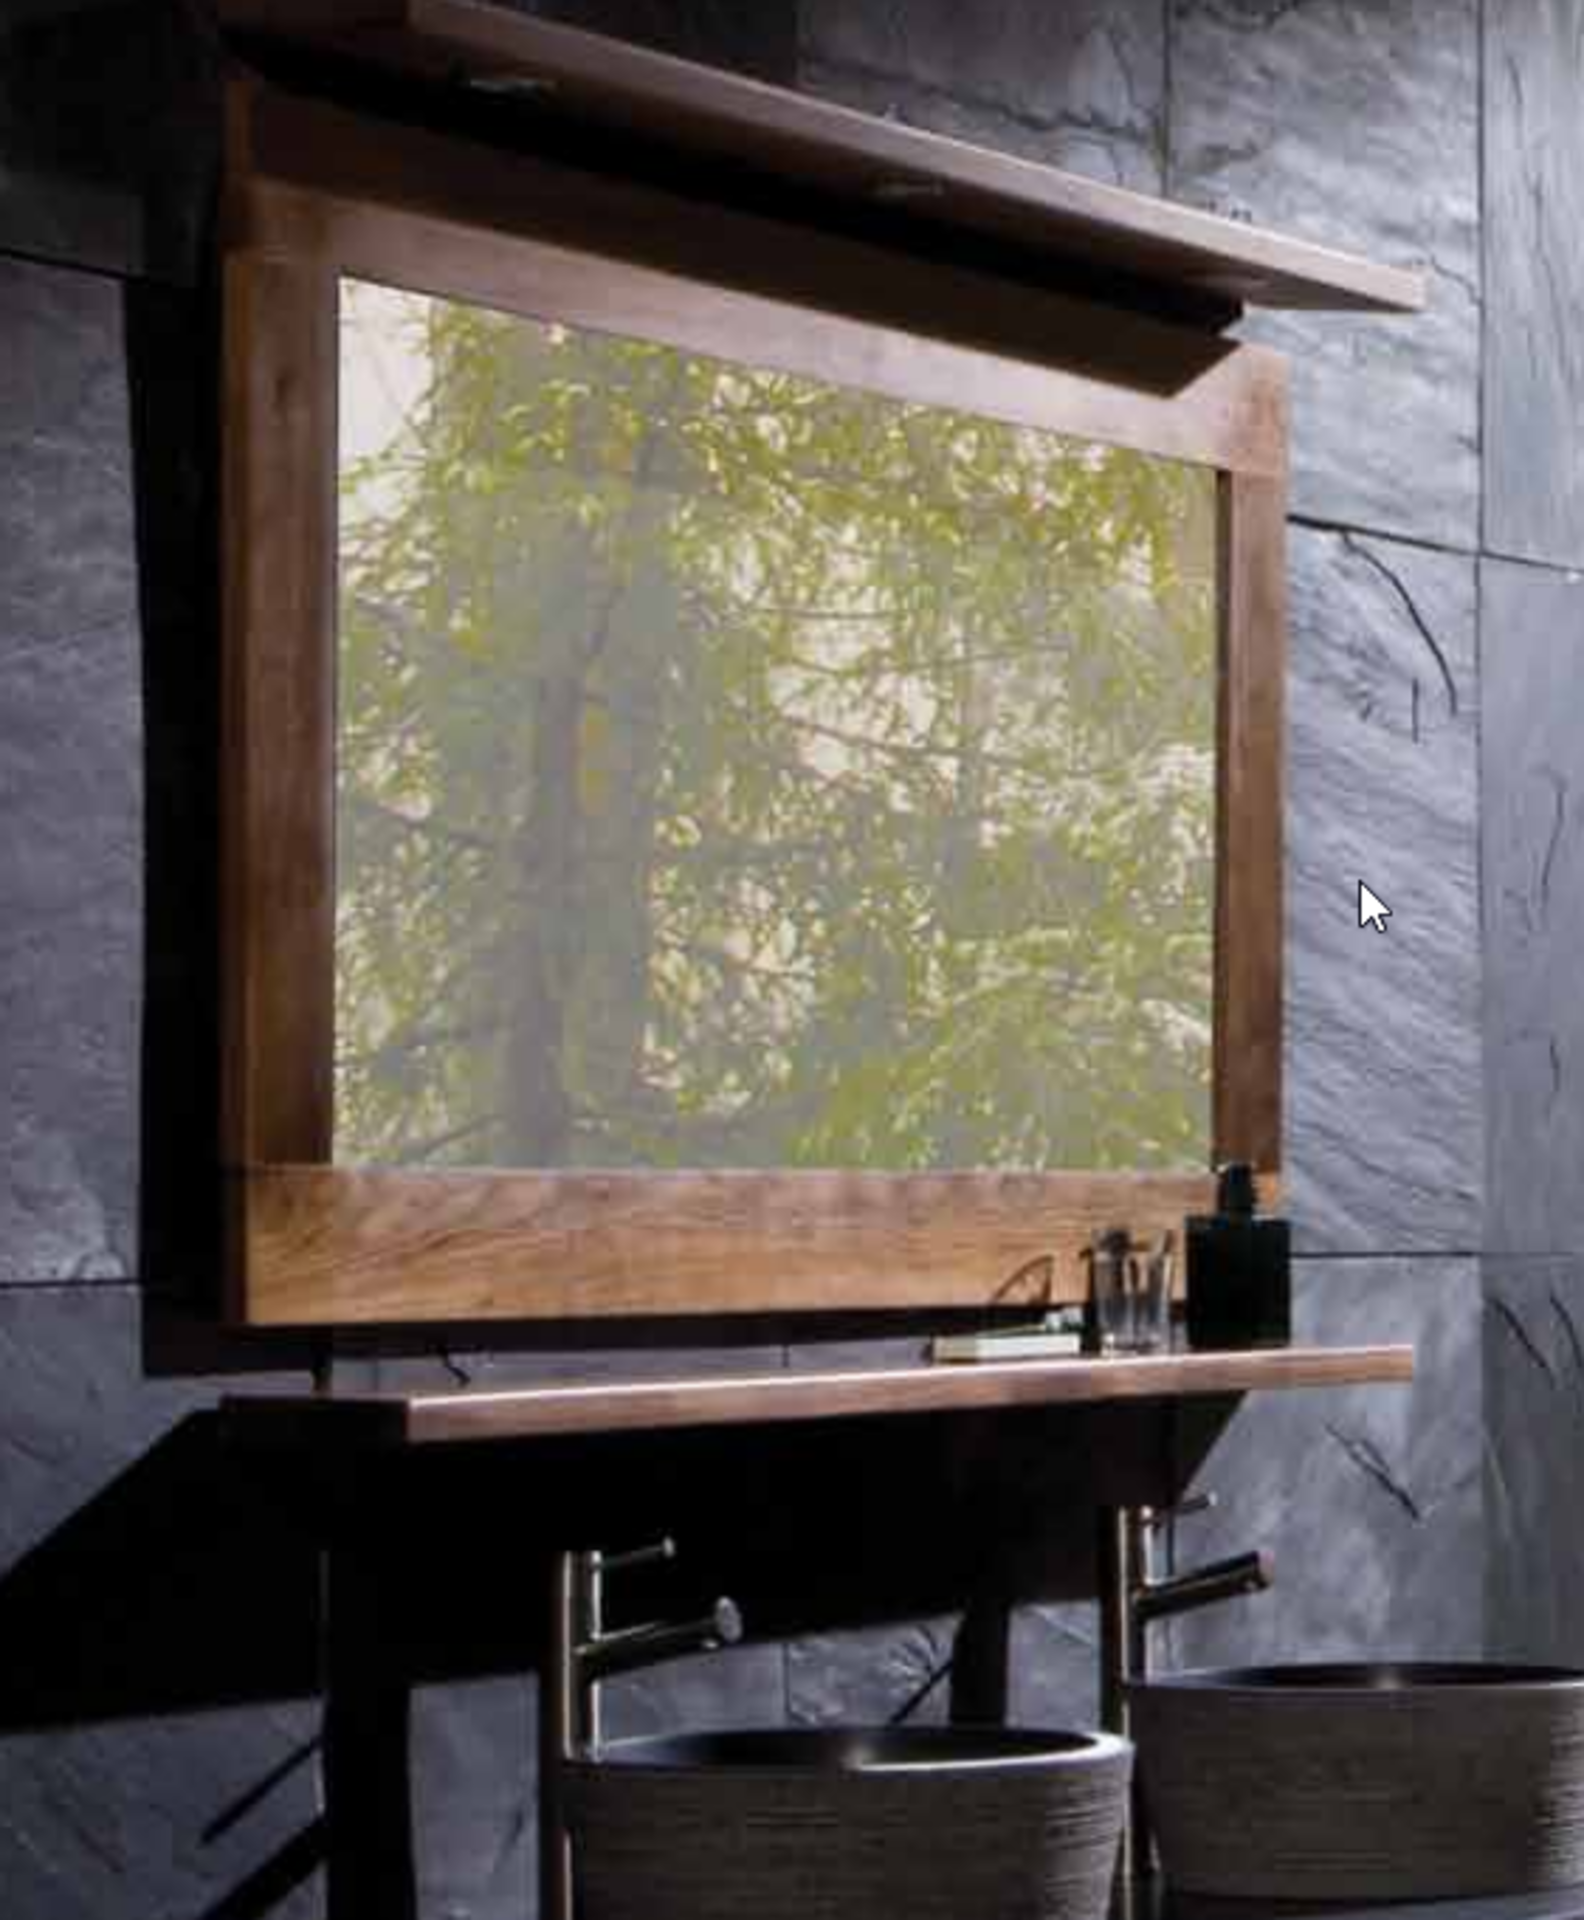 1 x Stonearth Bathroom Wall Mirror With Solid Walnut Frame and Bevelled Glass Mirror - Size: Large - Image 4 of 11